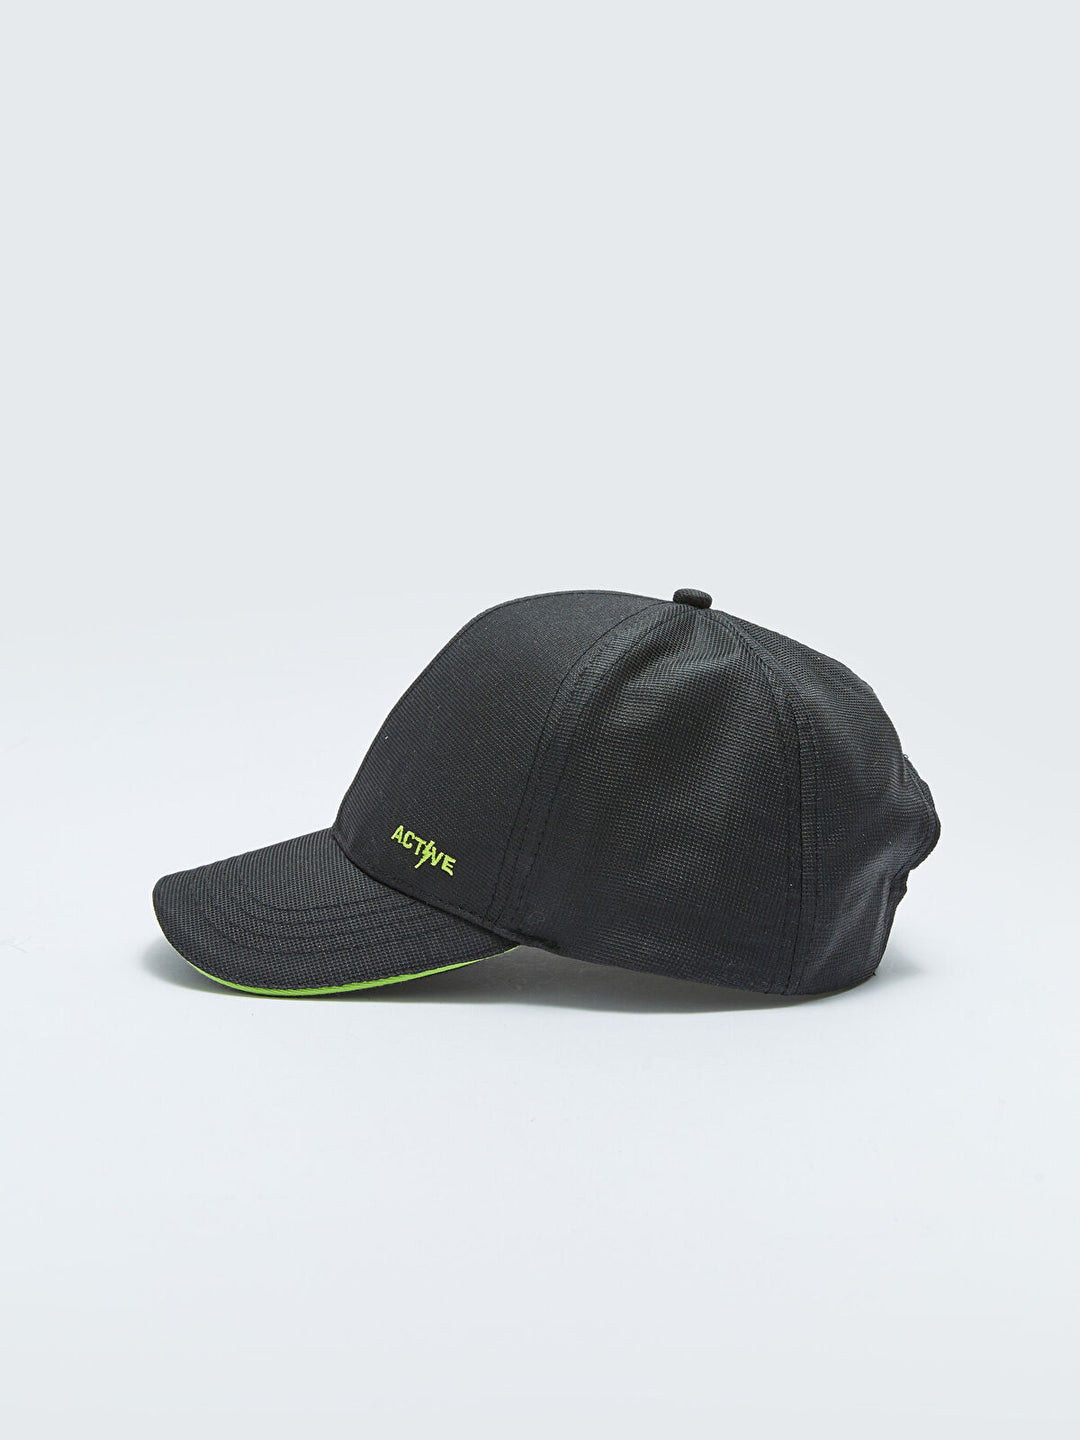 Embroidered Boy Cap Hat